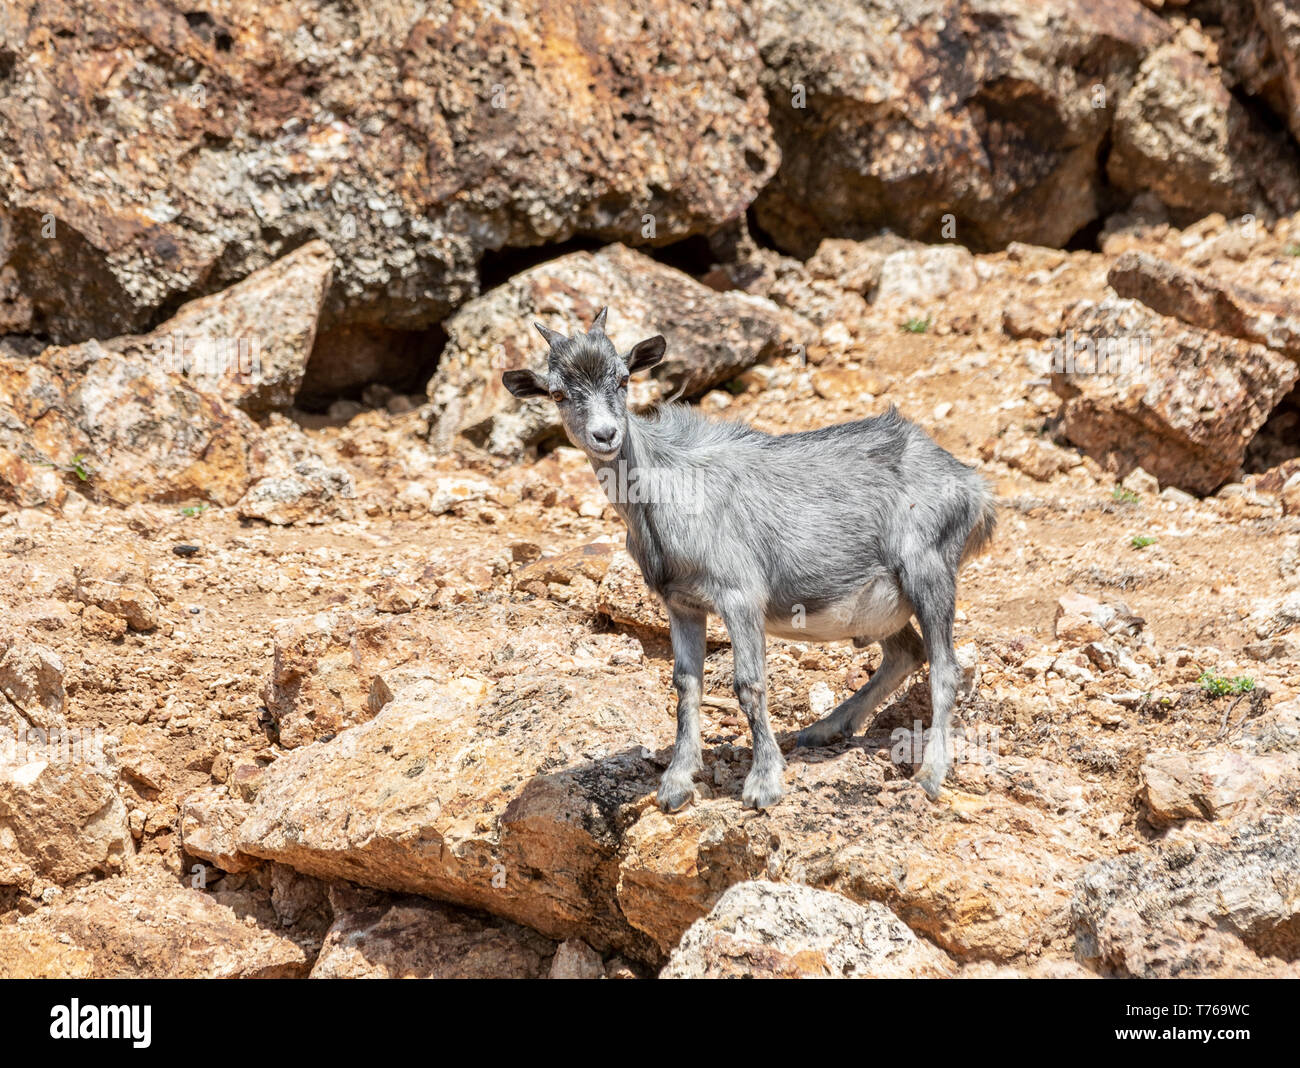 A grey adult goat standing on a rocky landscape in Grand Fond, St Barts Stock Photo